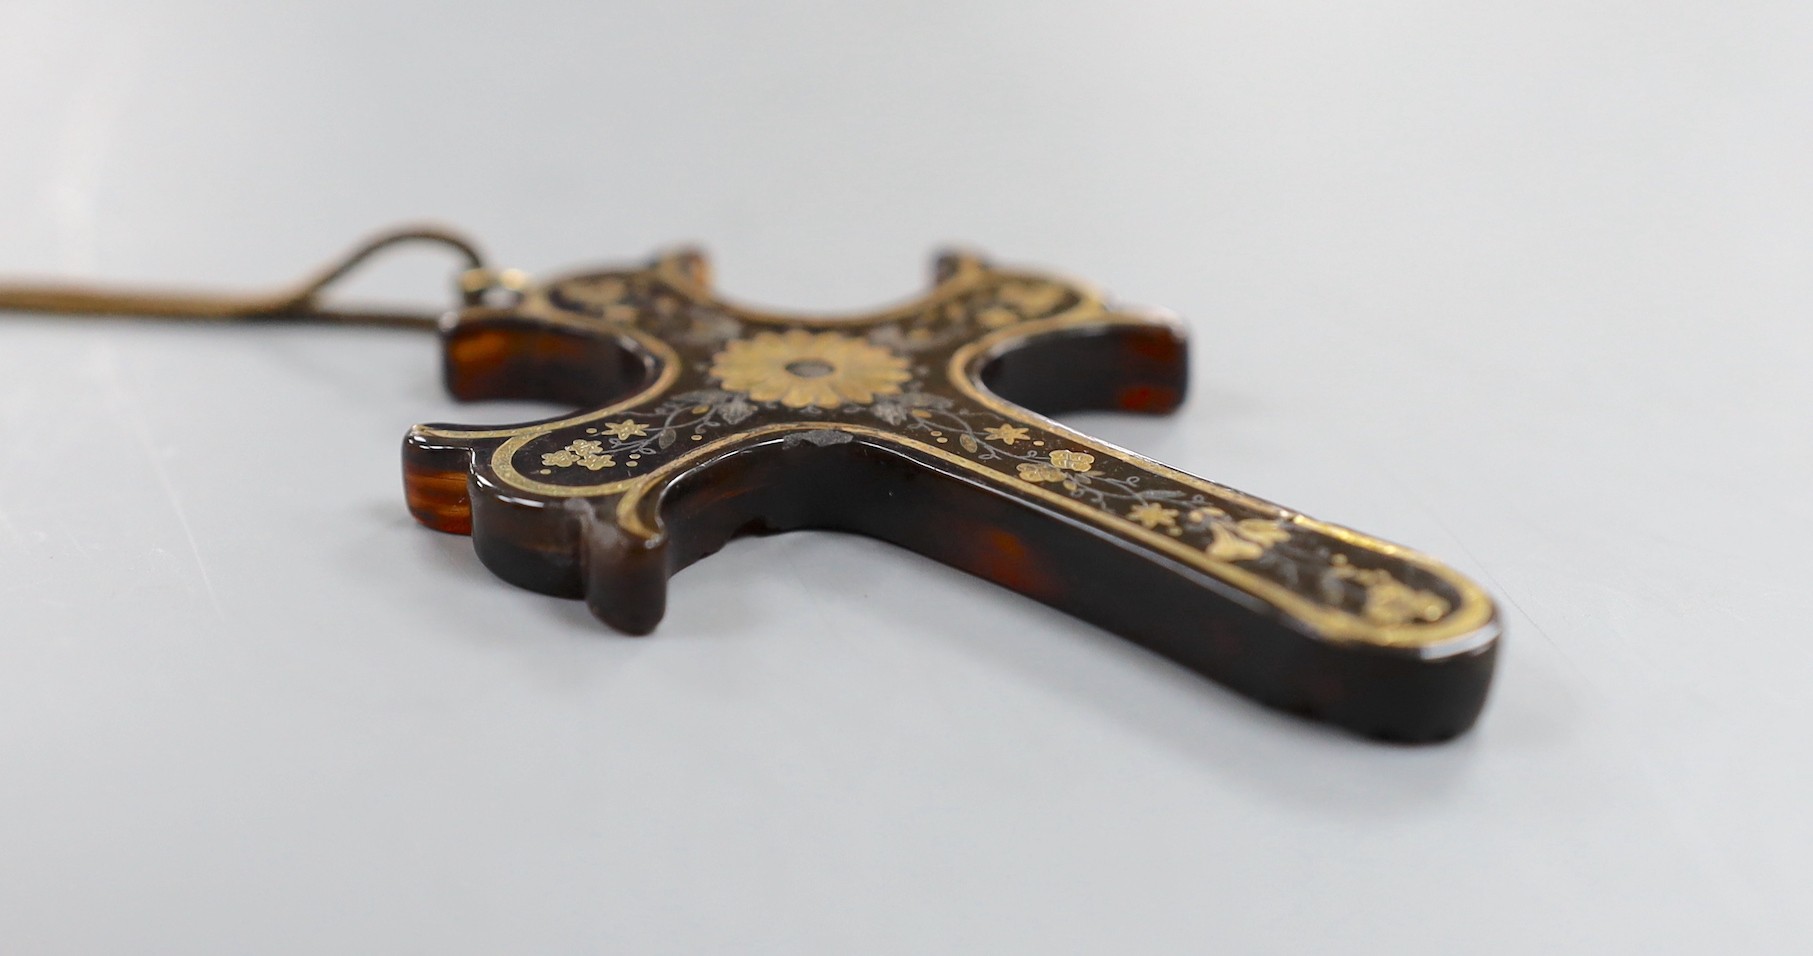 A Victorian tortoiseshell and yellow metal pique cross pendant, 73mm, on a gilt metal chain.